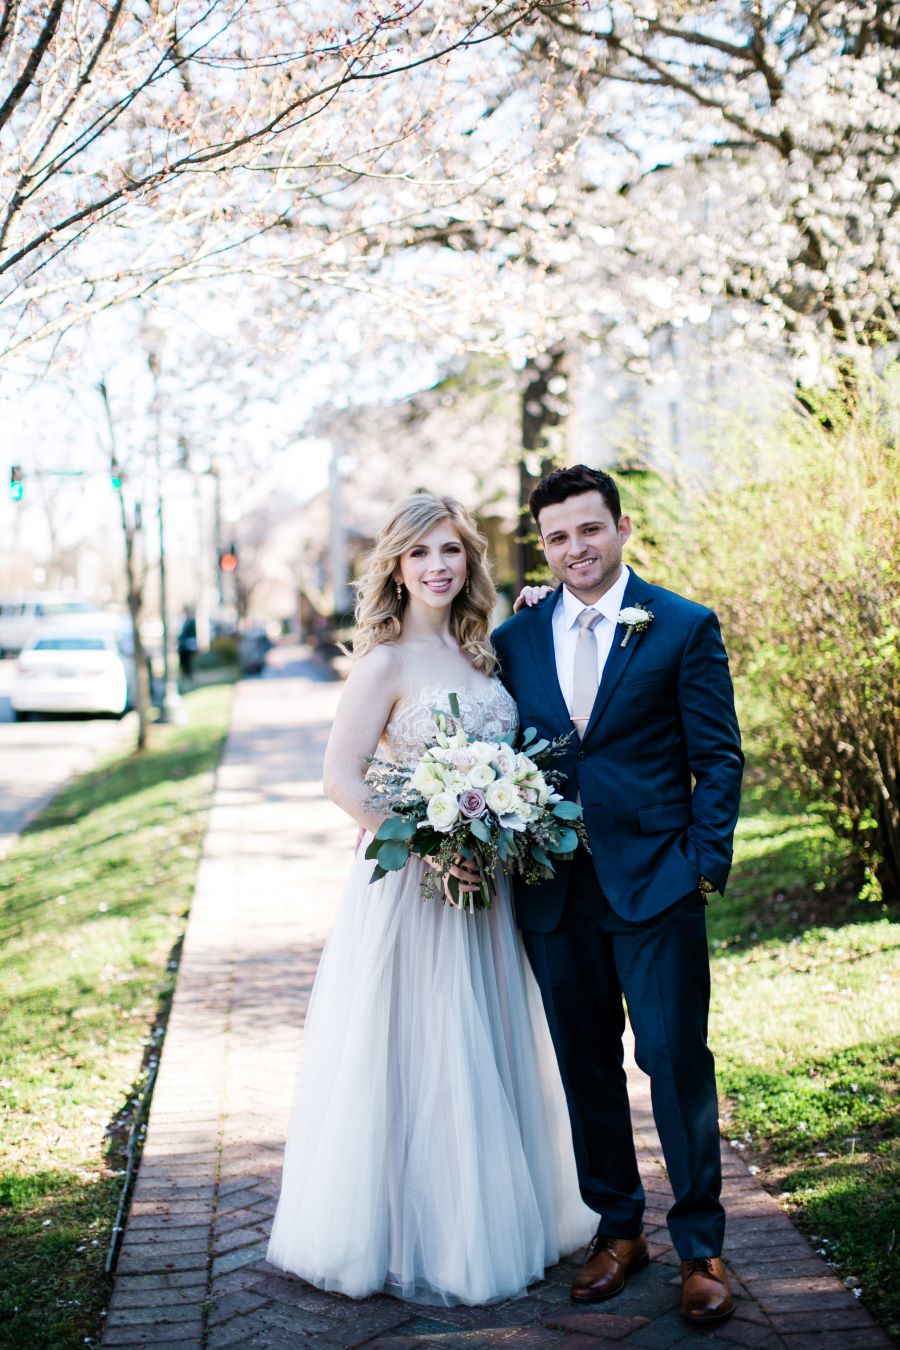 Bride and groom posing on brick sidewalk in front of wedding venue / Elopement / Spring / March / Dusty Rose